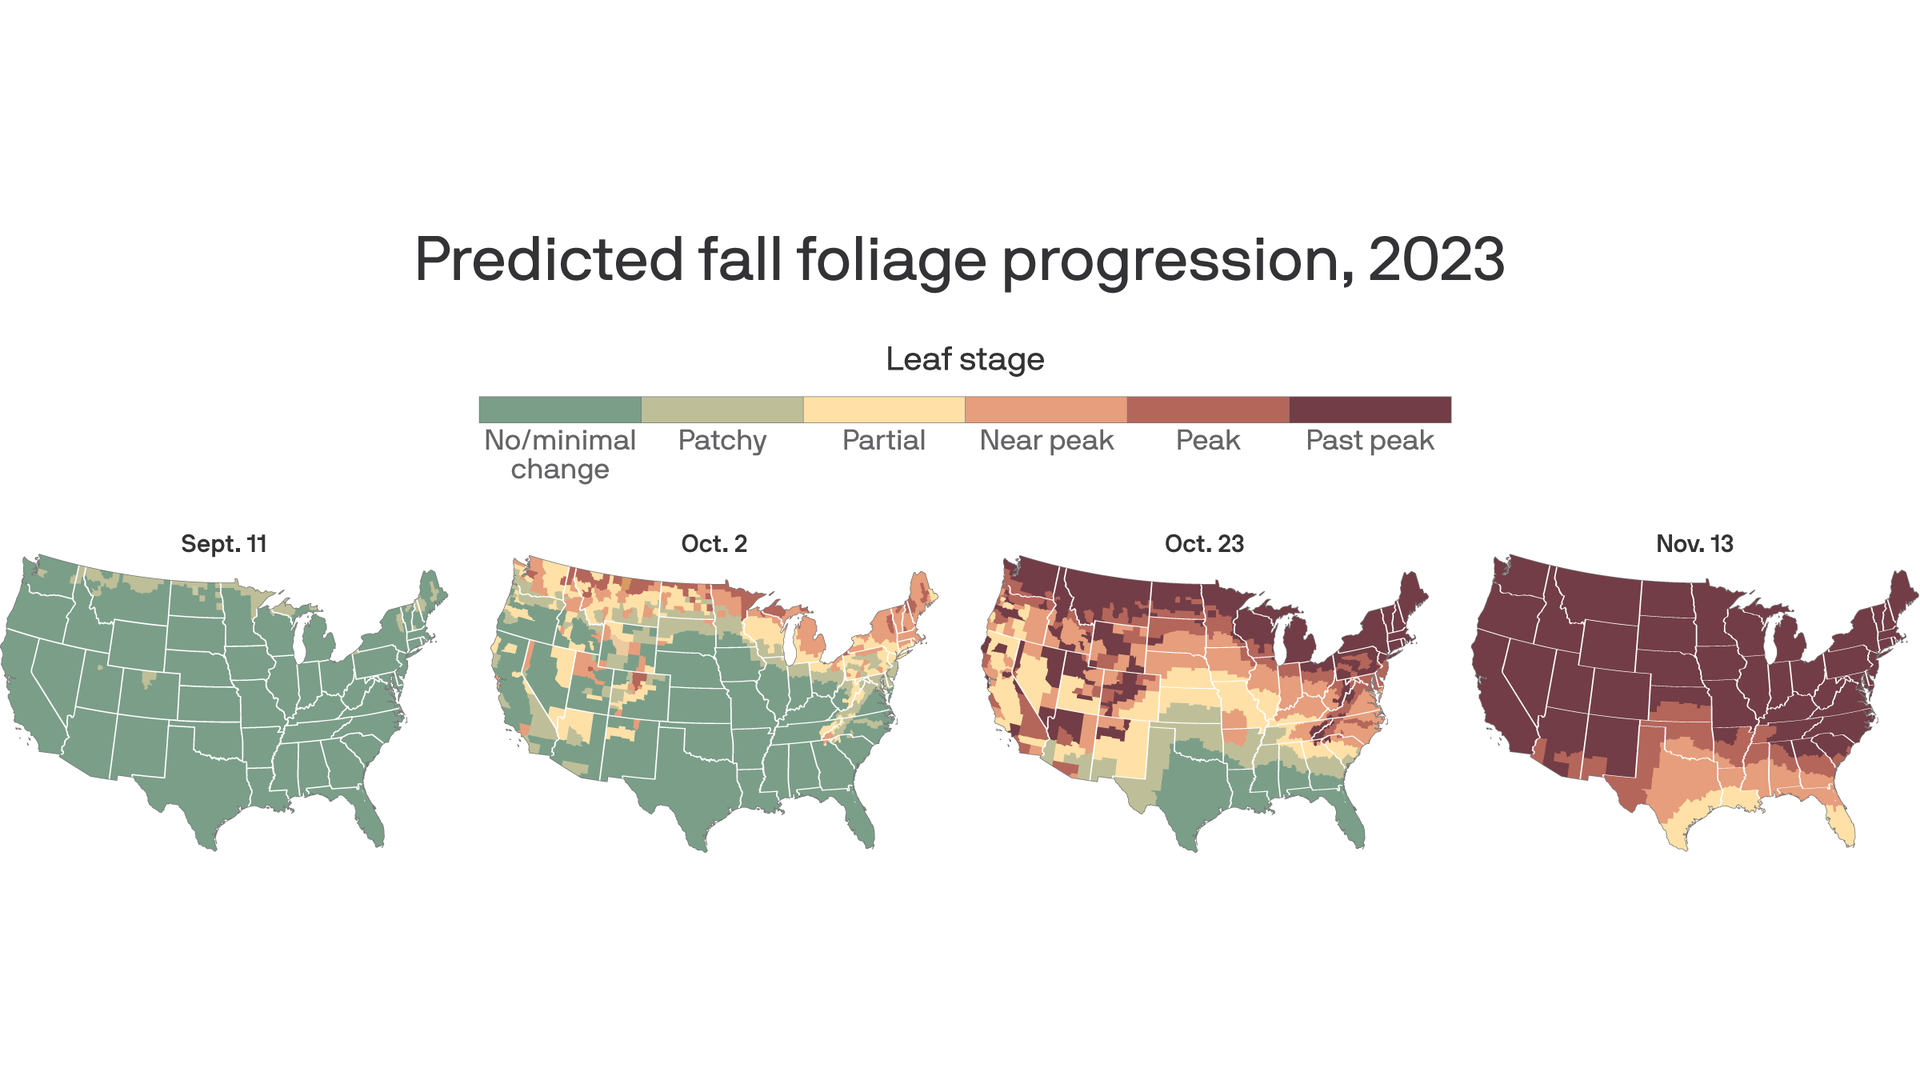 Maps showing predicted fall foliage progressions across the country. 